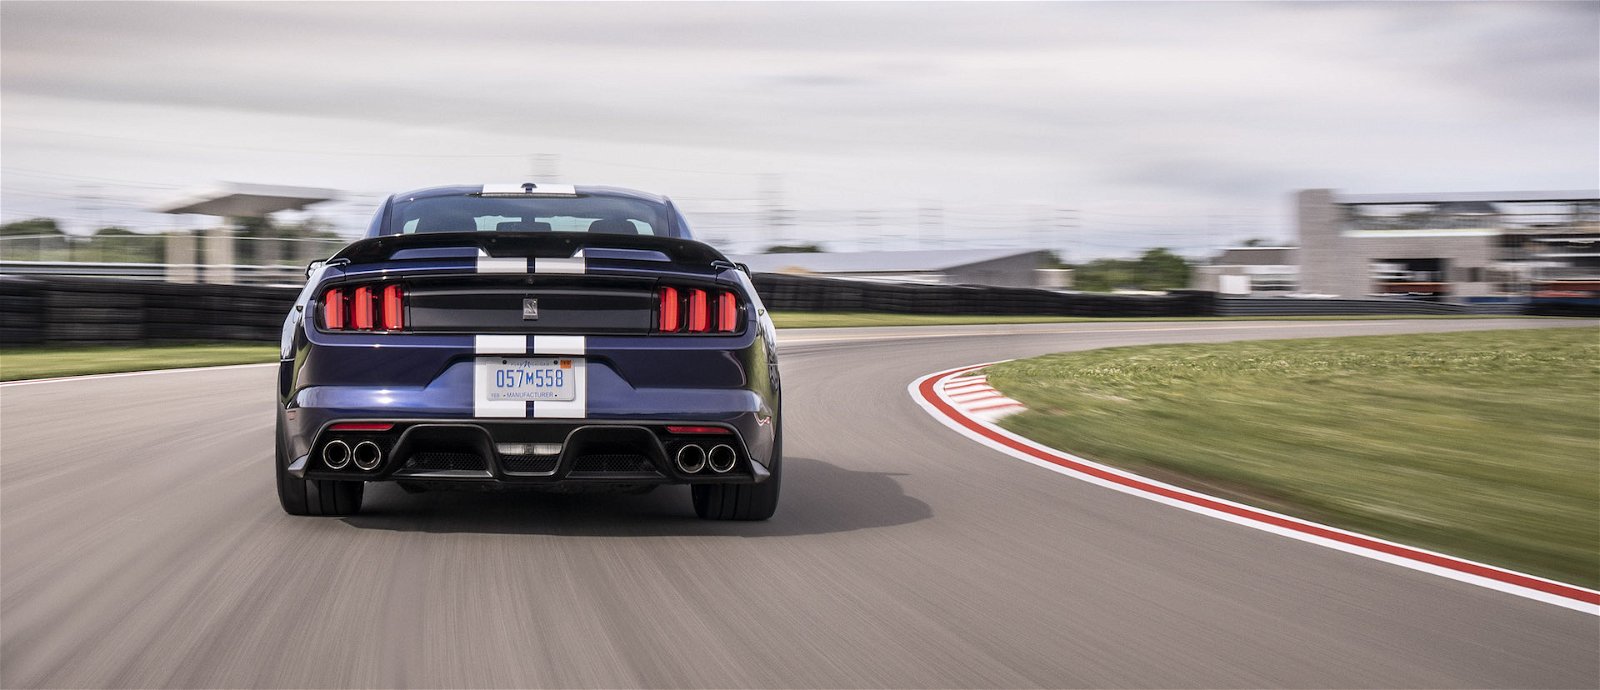 2019 mustang shelby gt350 5